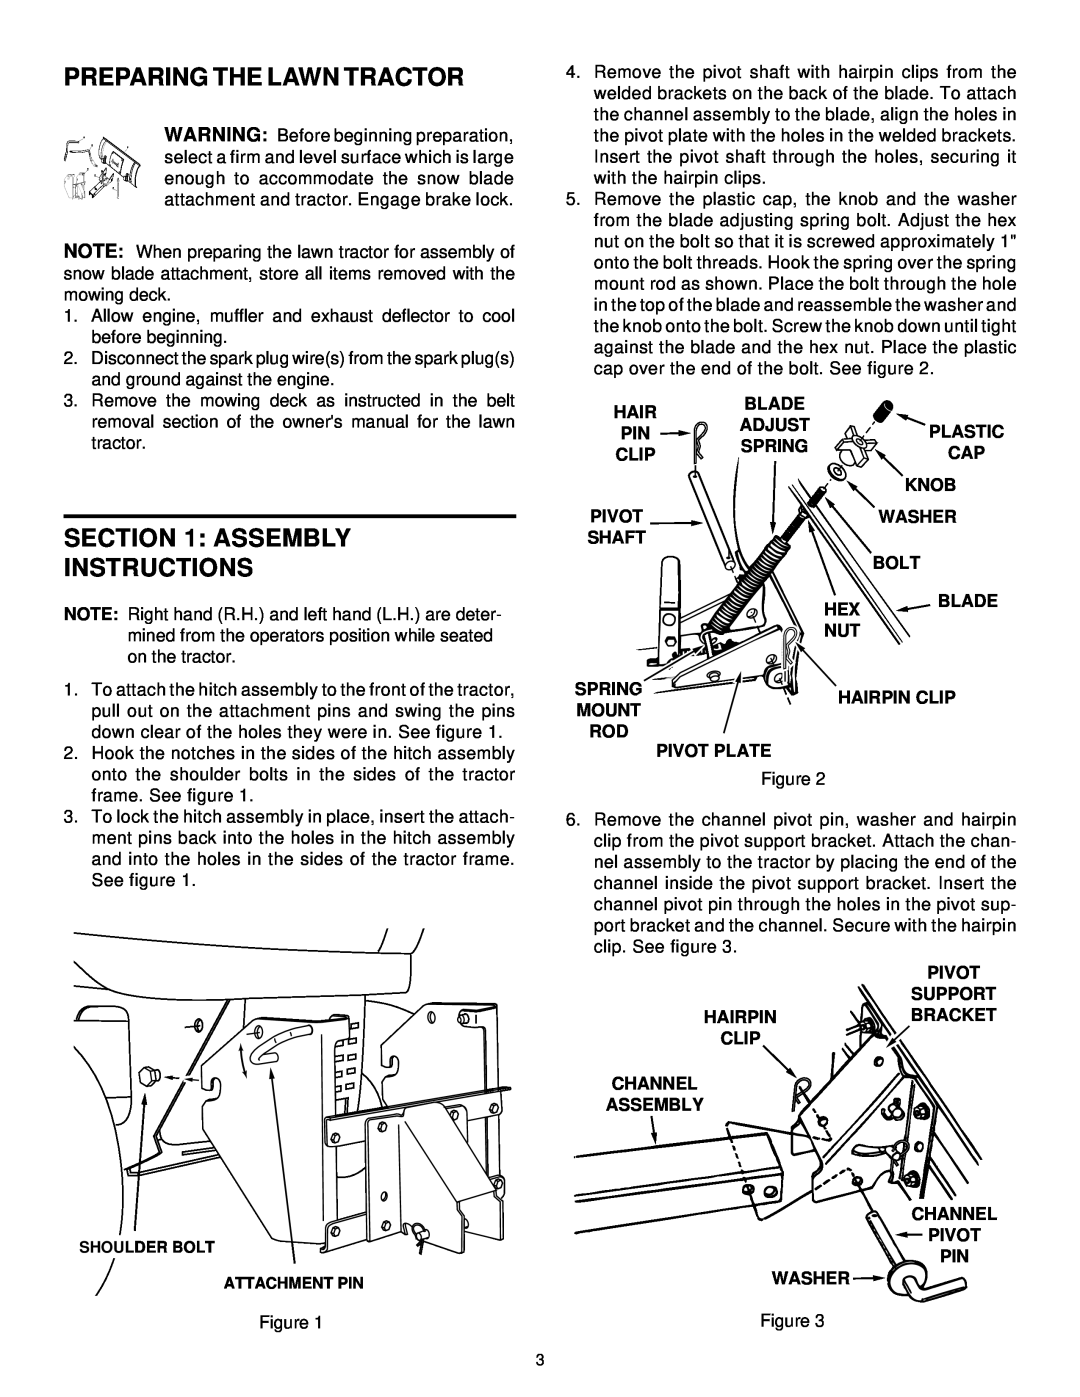 MTD 46" SNOW BLADE, 190-822 manual Preparing The Lawn Tractor, Assembly Instructions 